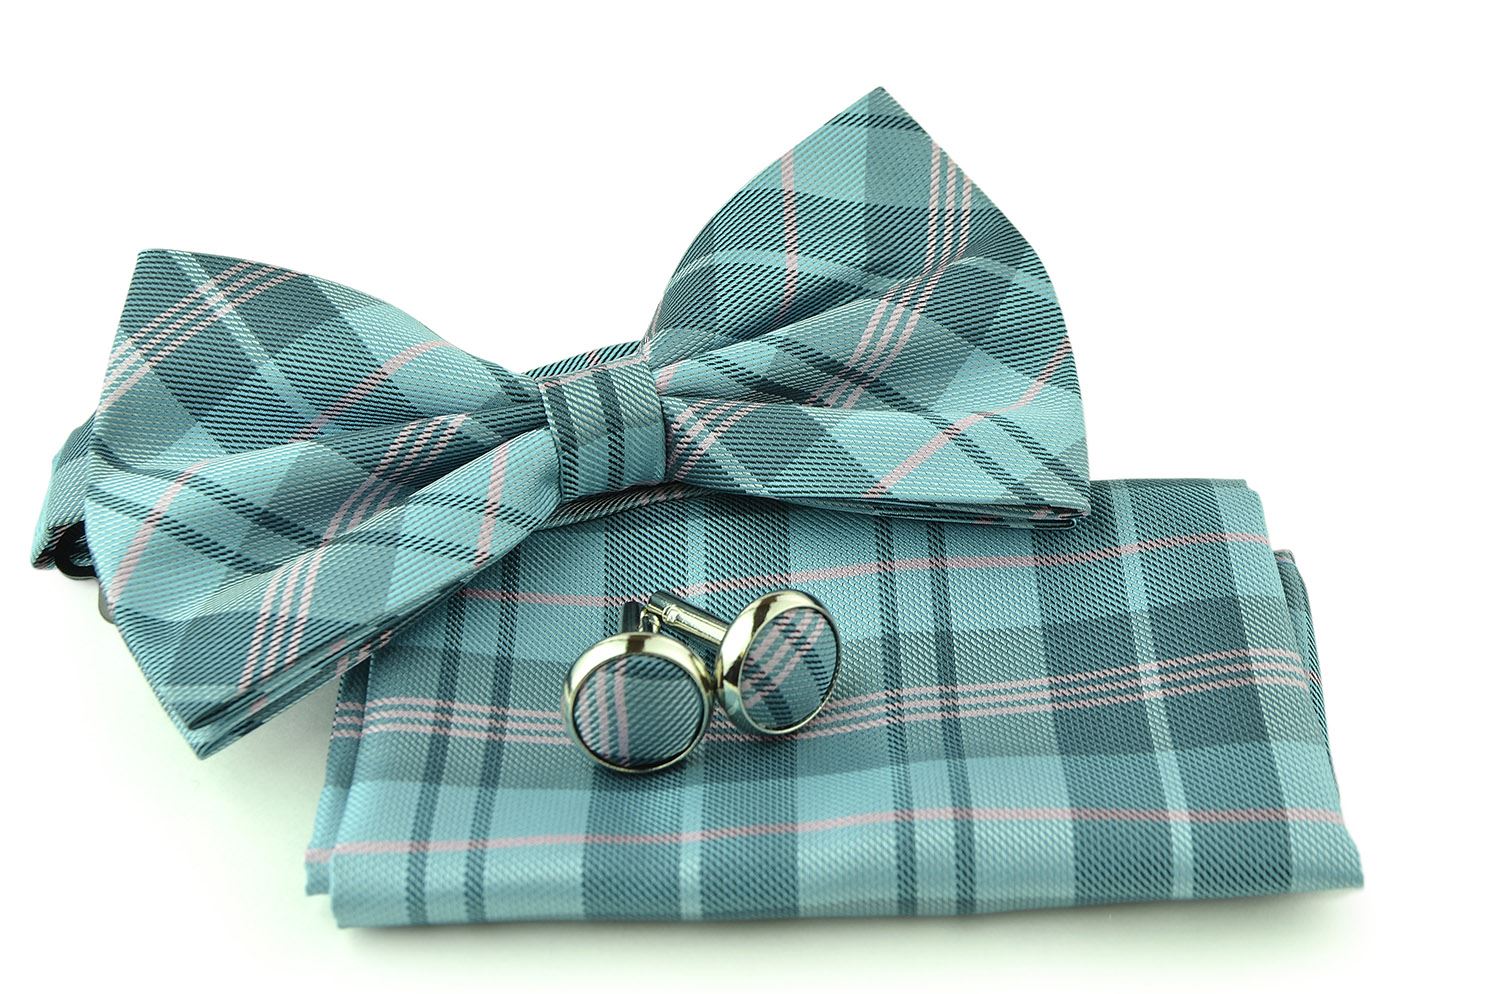 Uomo Vennetto Men's Powder Blue and Pink Plaid Polyester Bow Tie, Hanky and Cufflinks